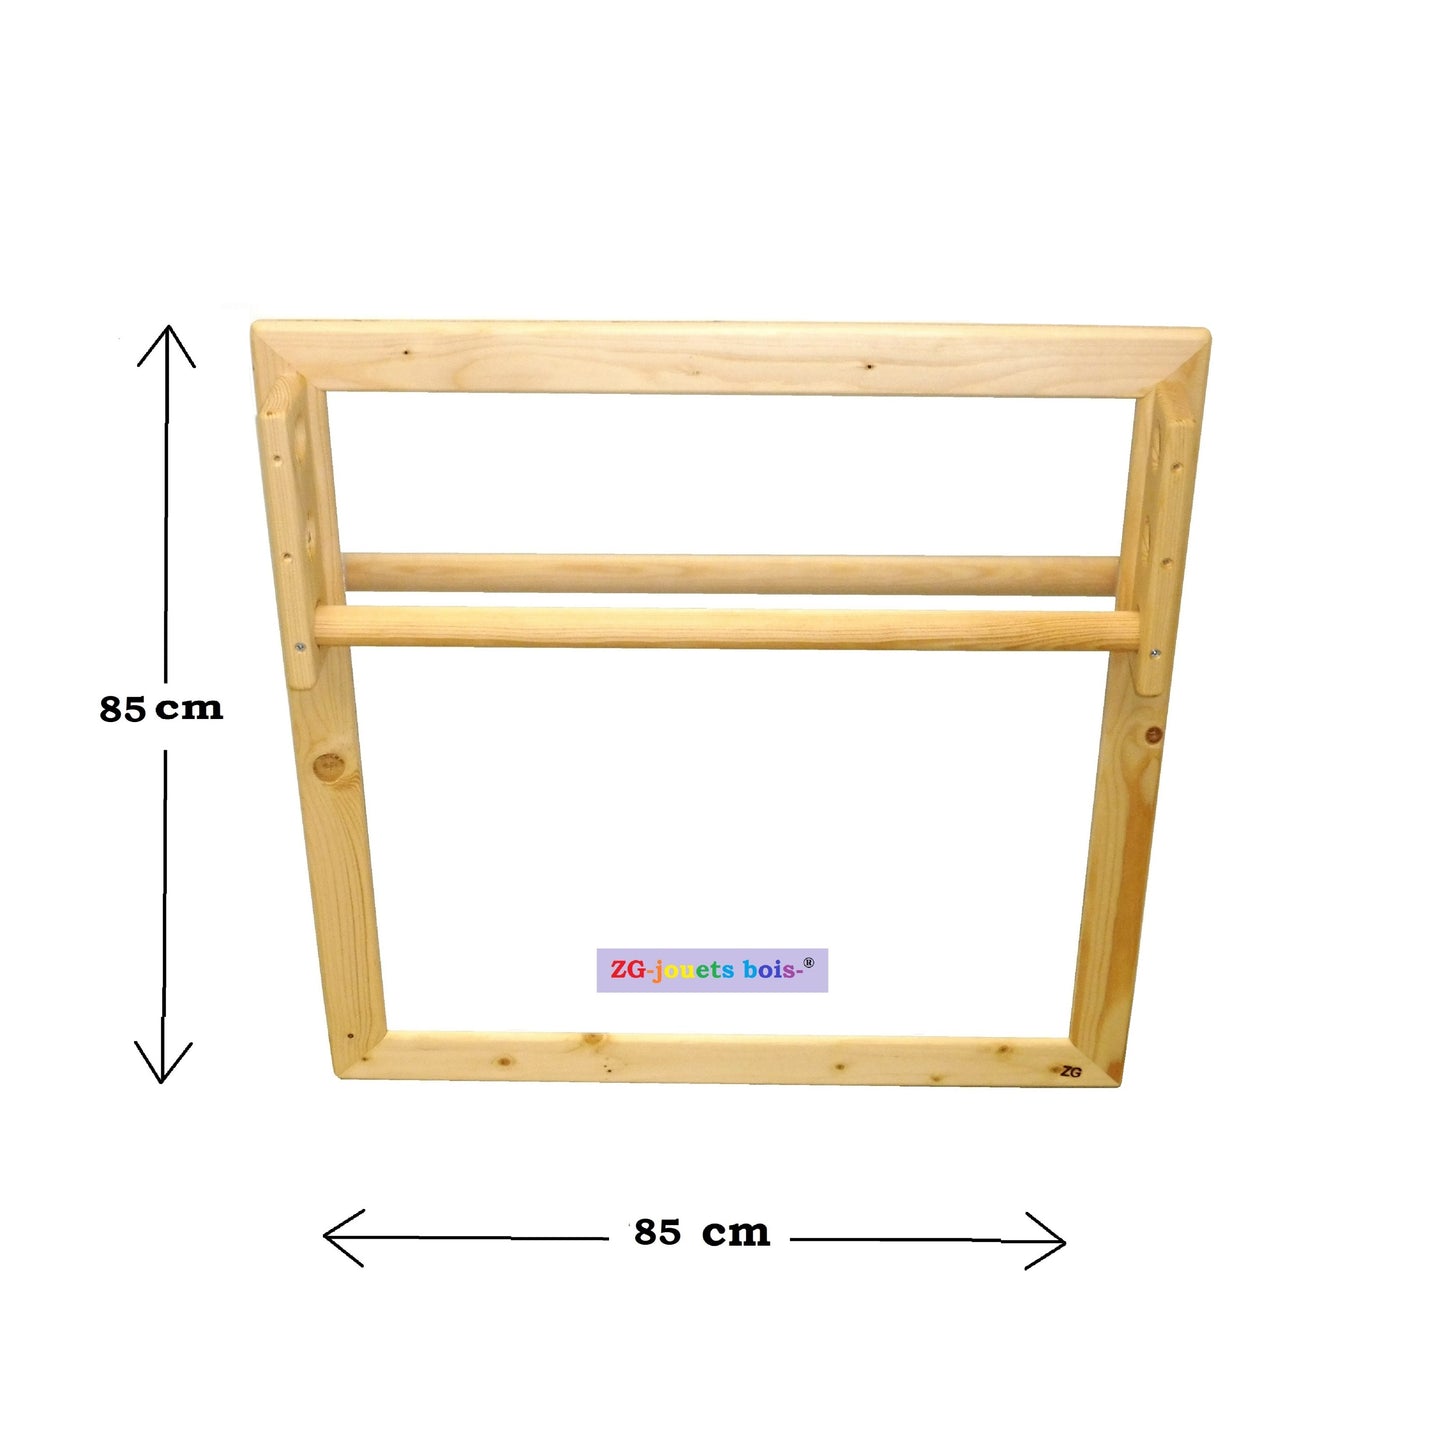 Unbreakable mirror Nido Montessori SQUARE format of your choice, adjustable pull-up bar